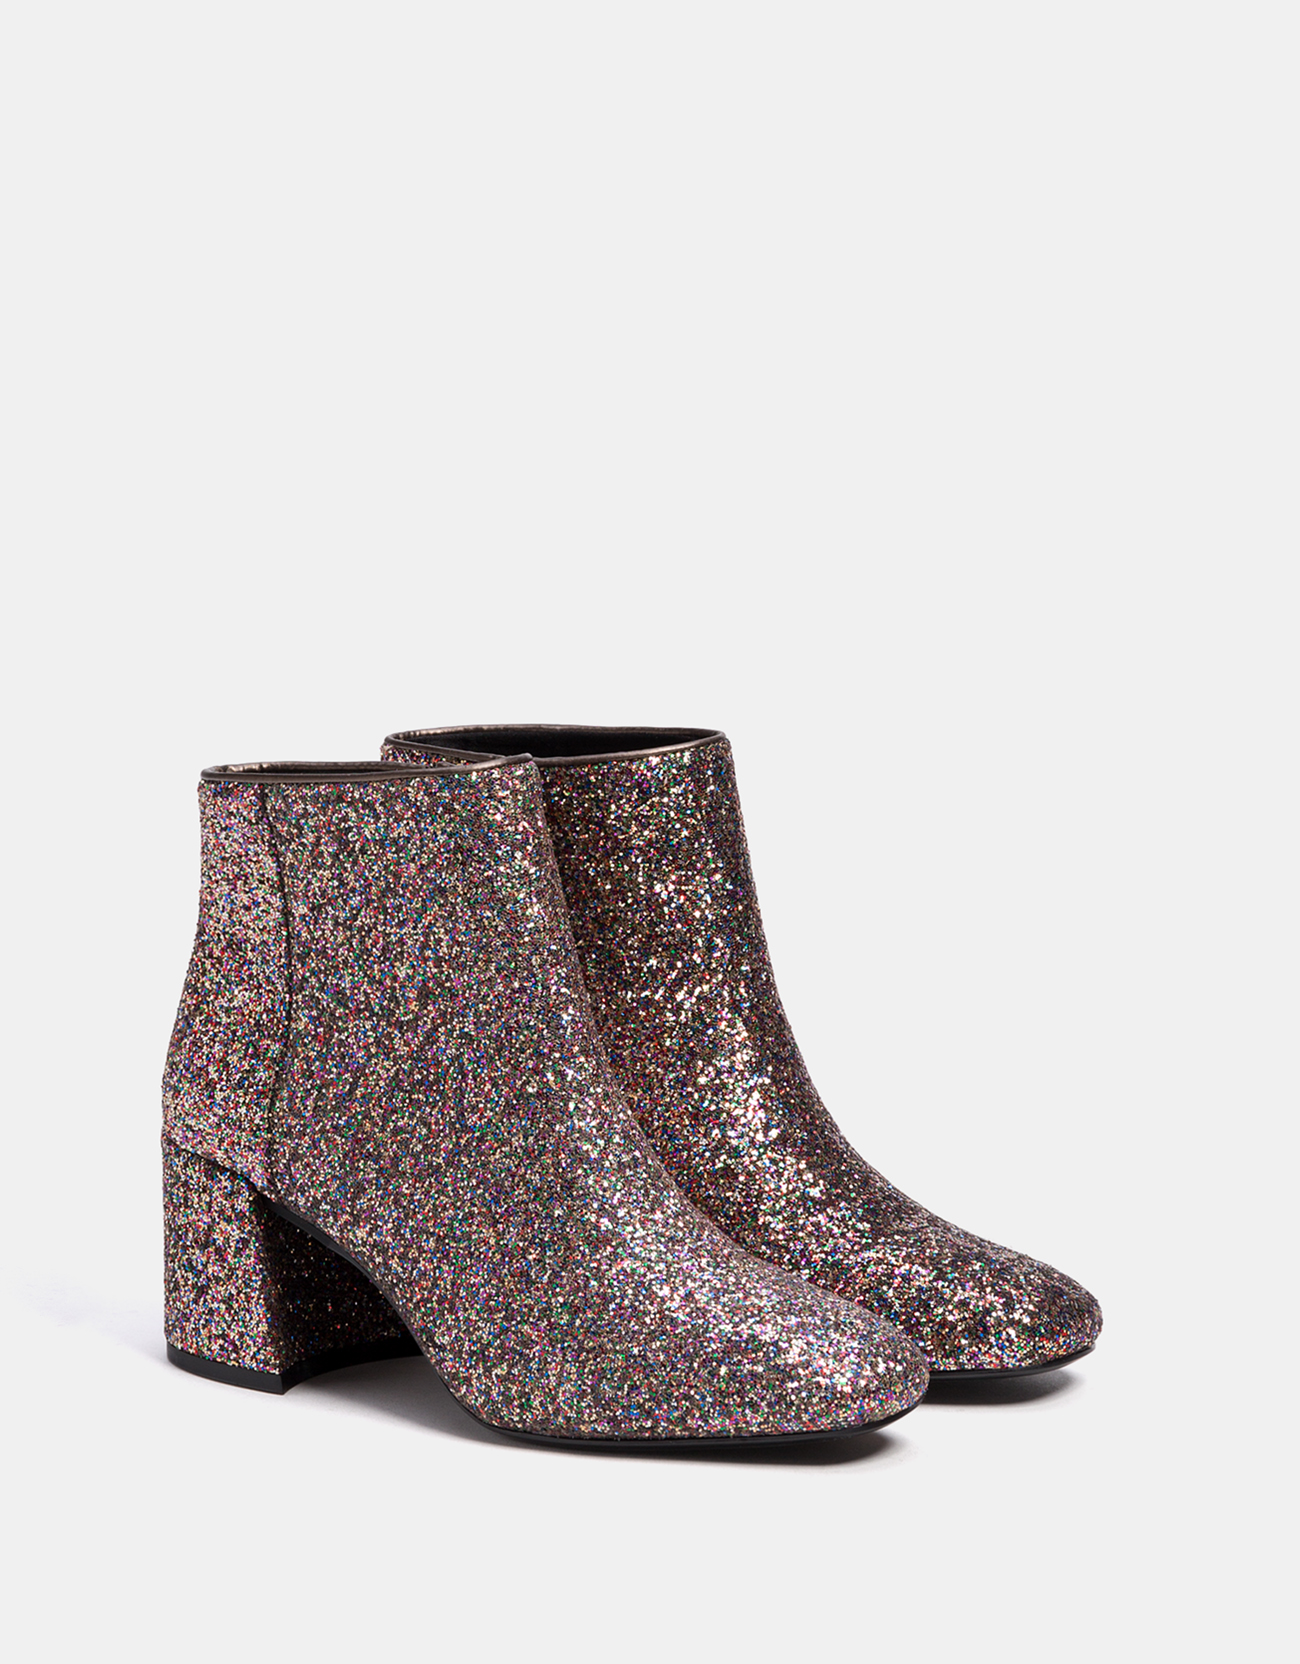 Bershka Shiny mid-heel ankle boots at £7.99 | love the brands